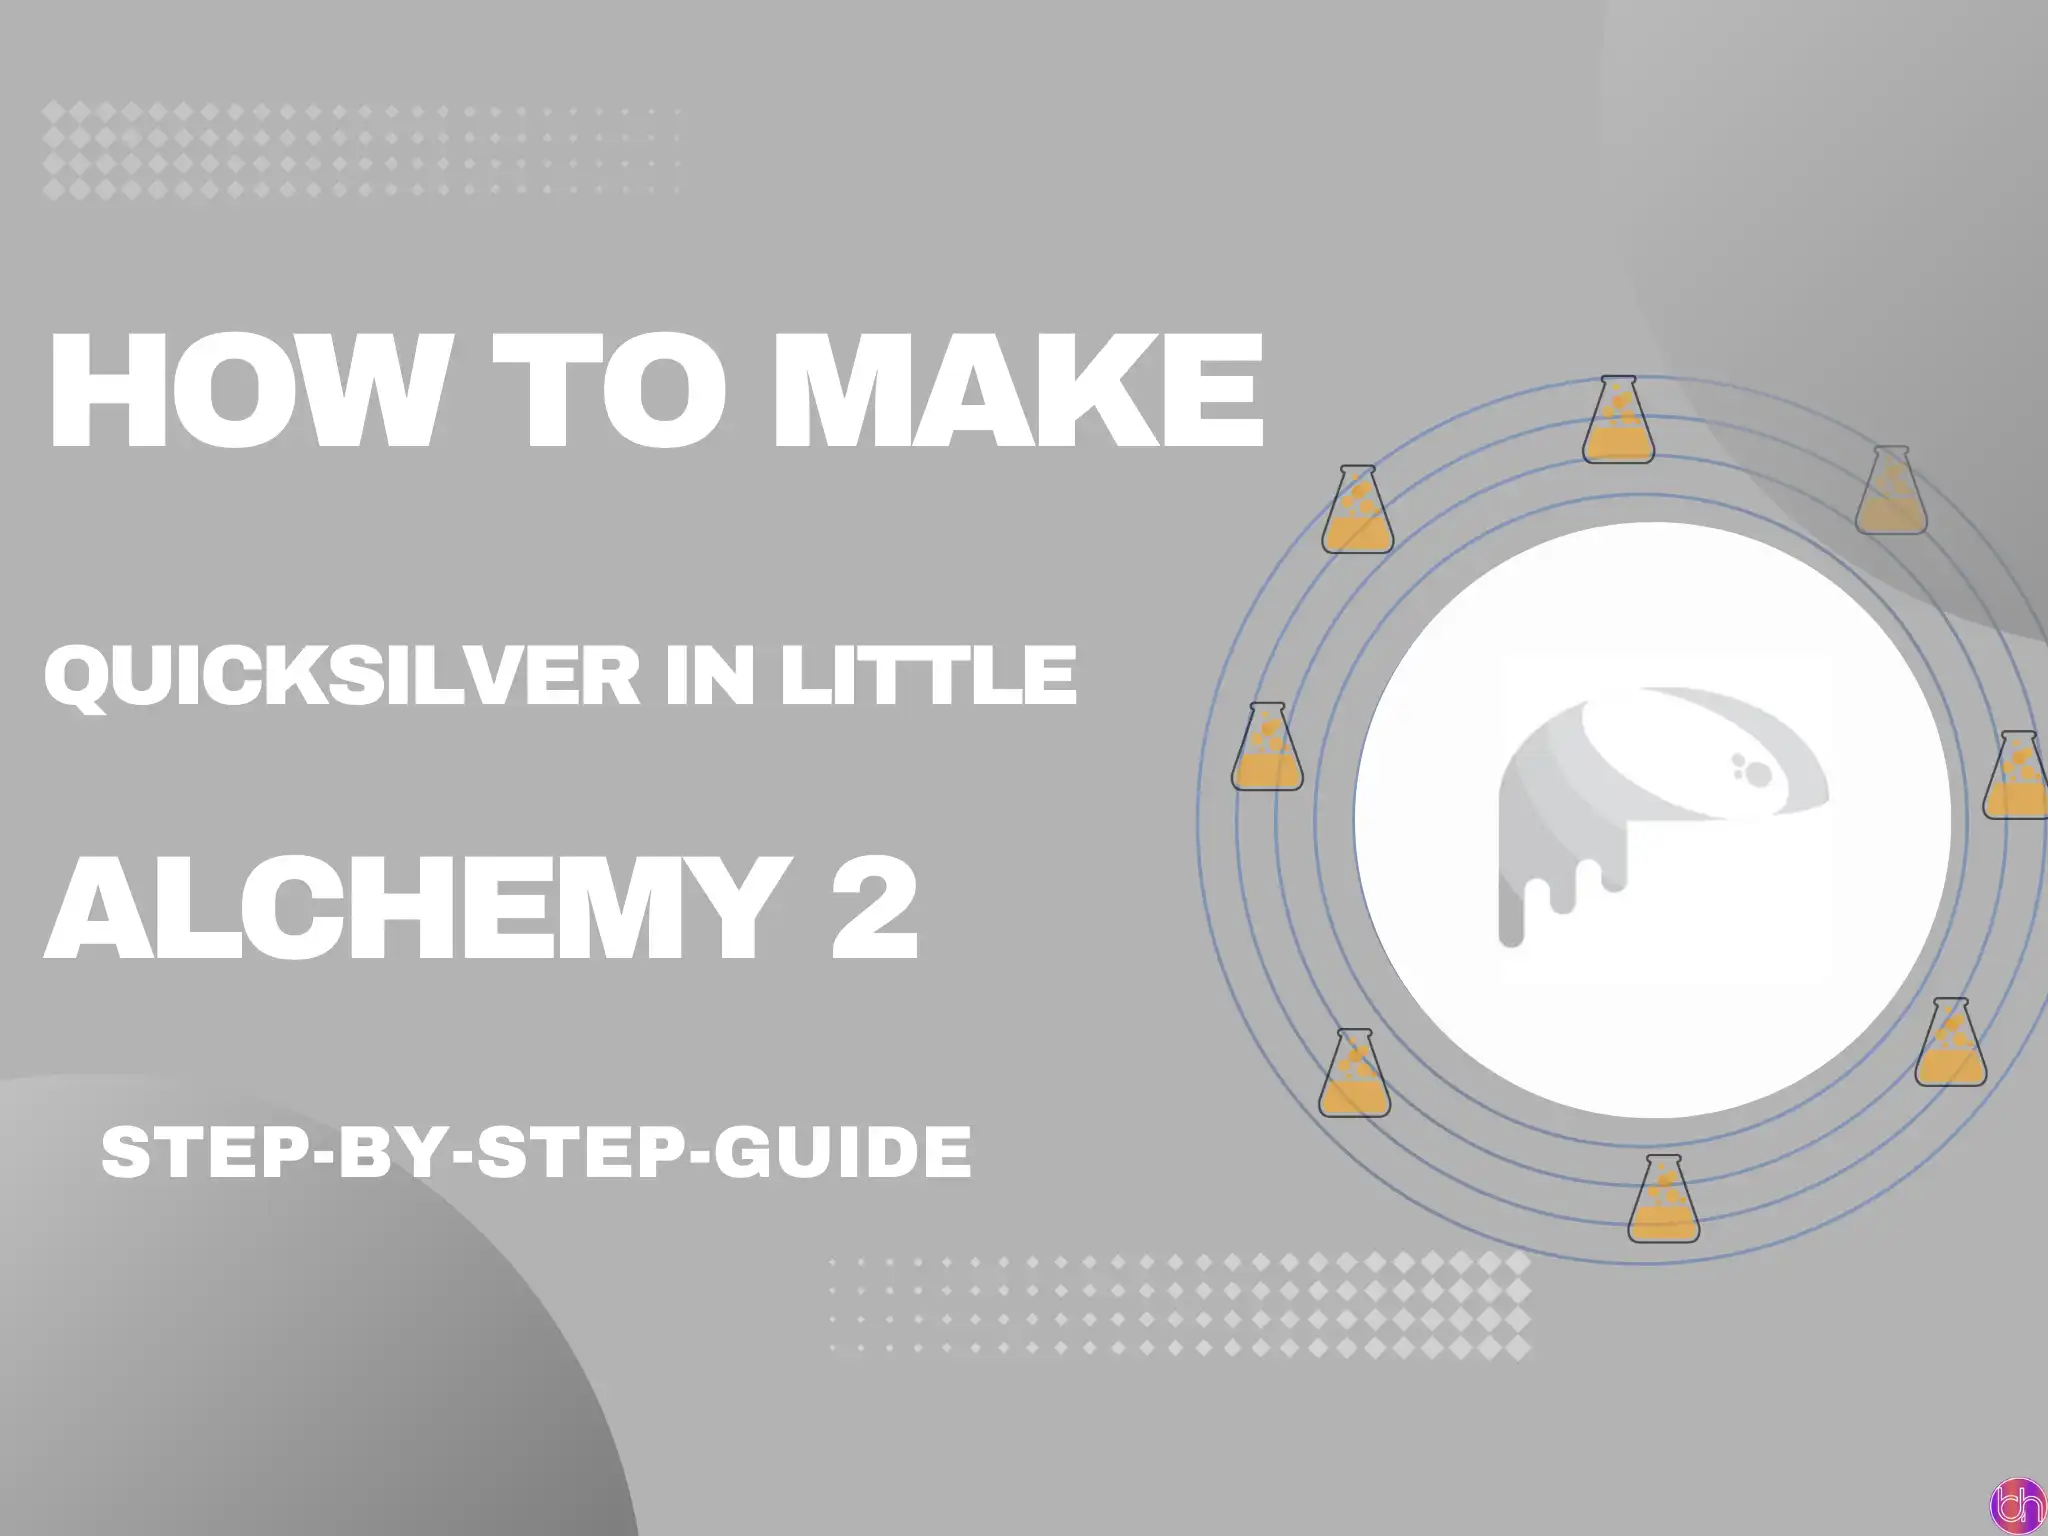 How to make Quicksilver in Little Alchemy 2